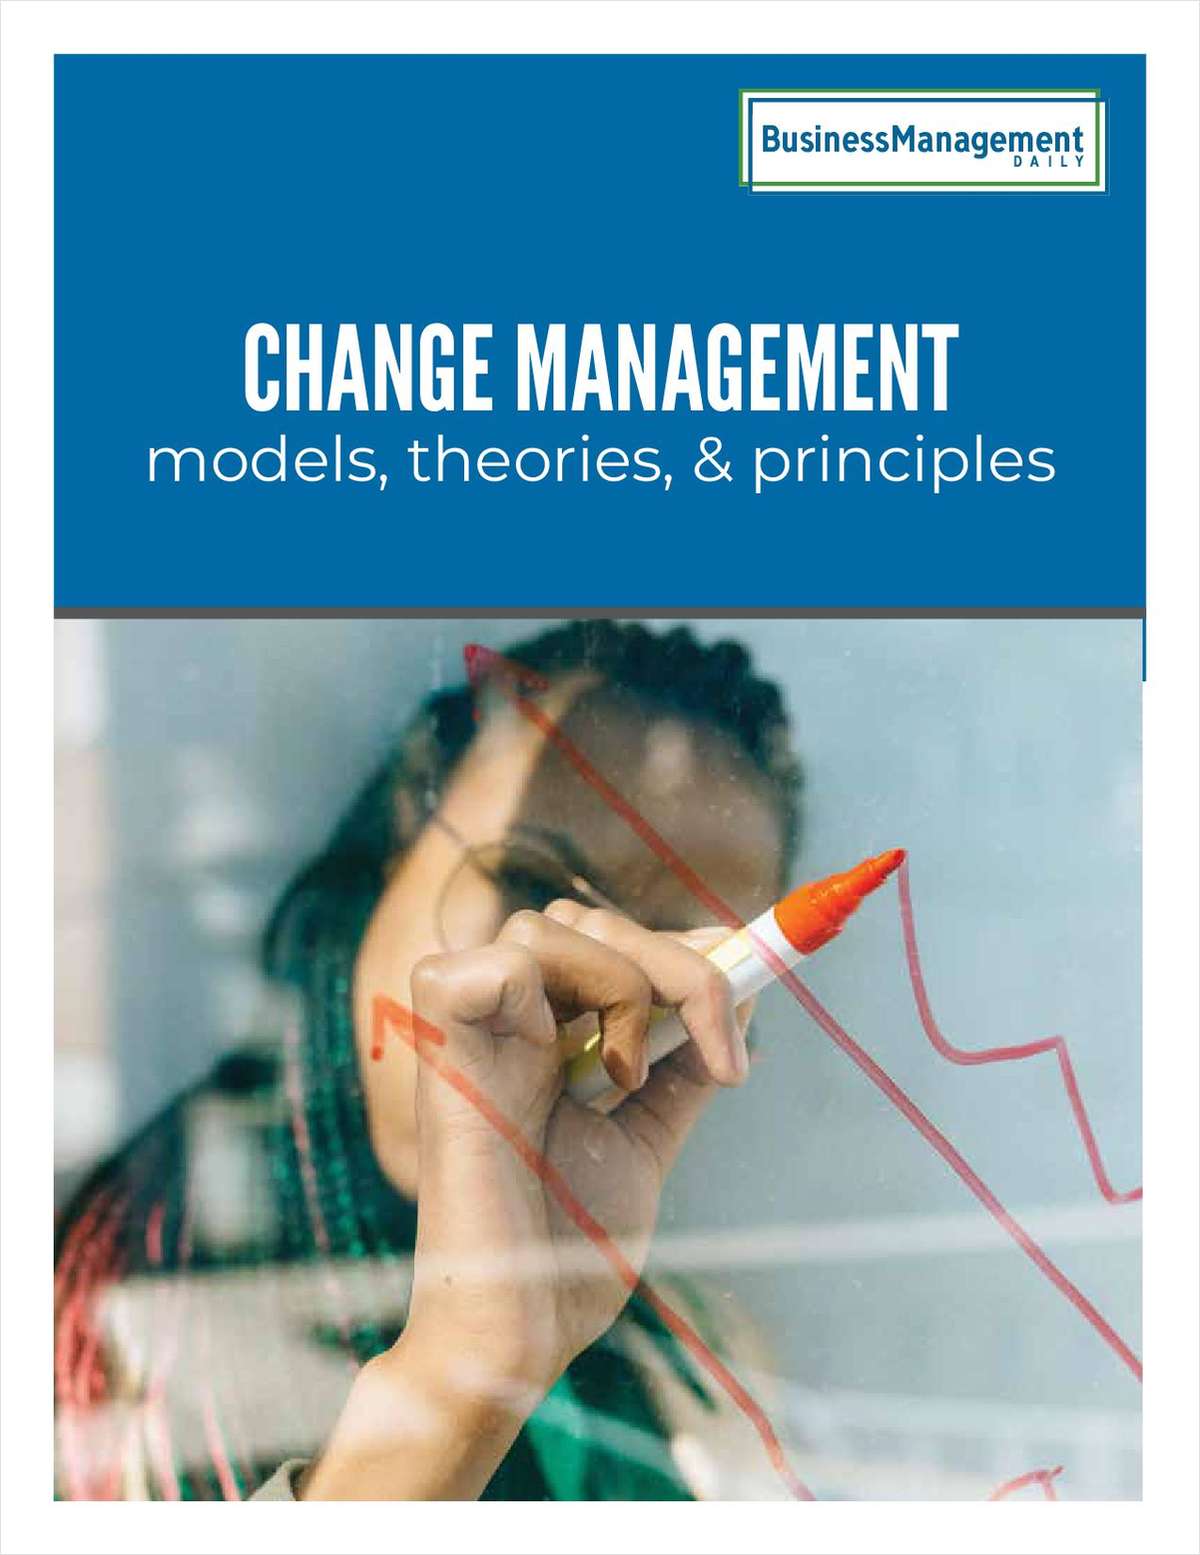 Change management models, theories, and principles